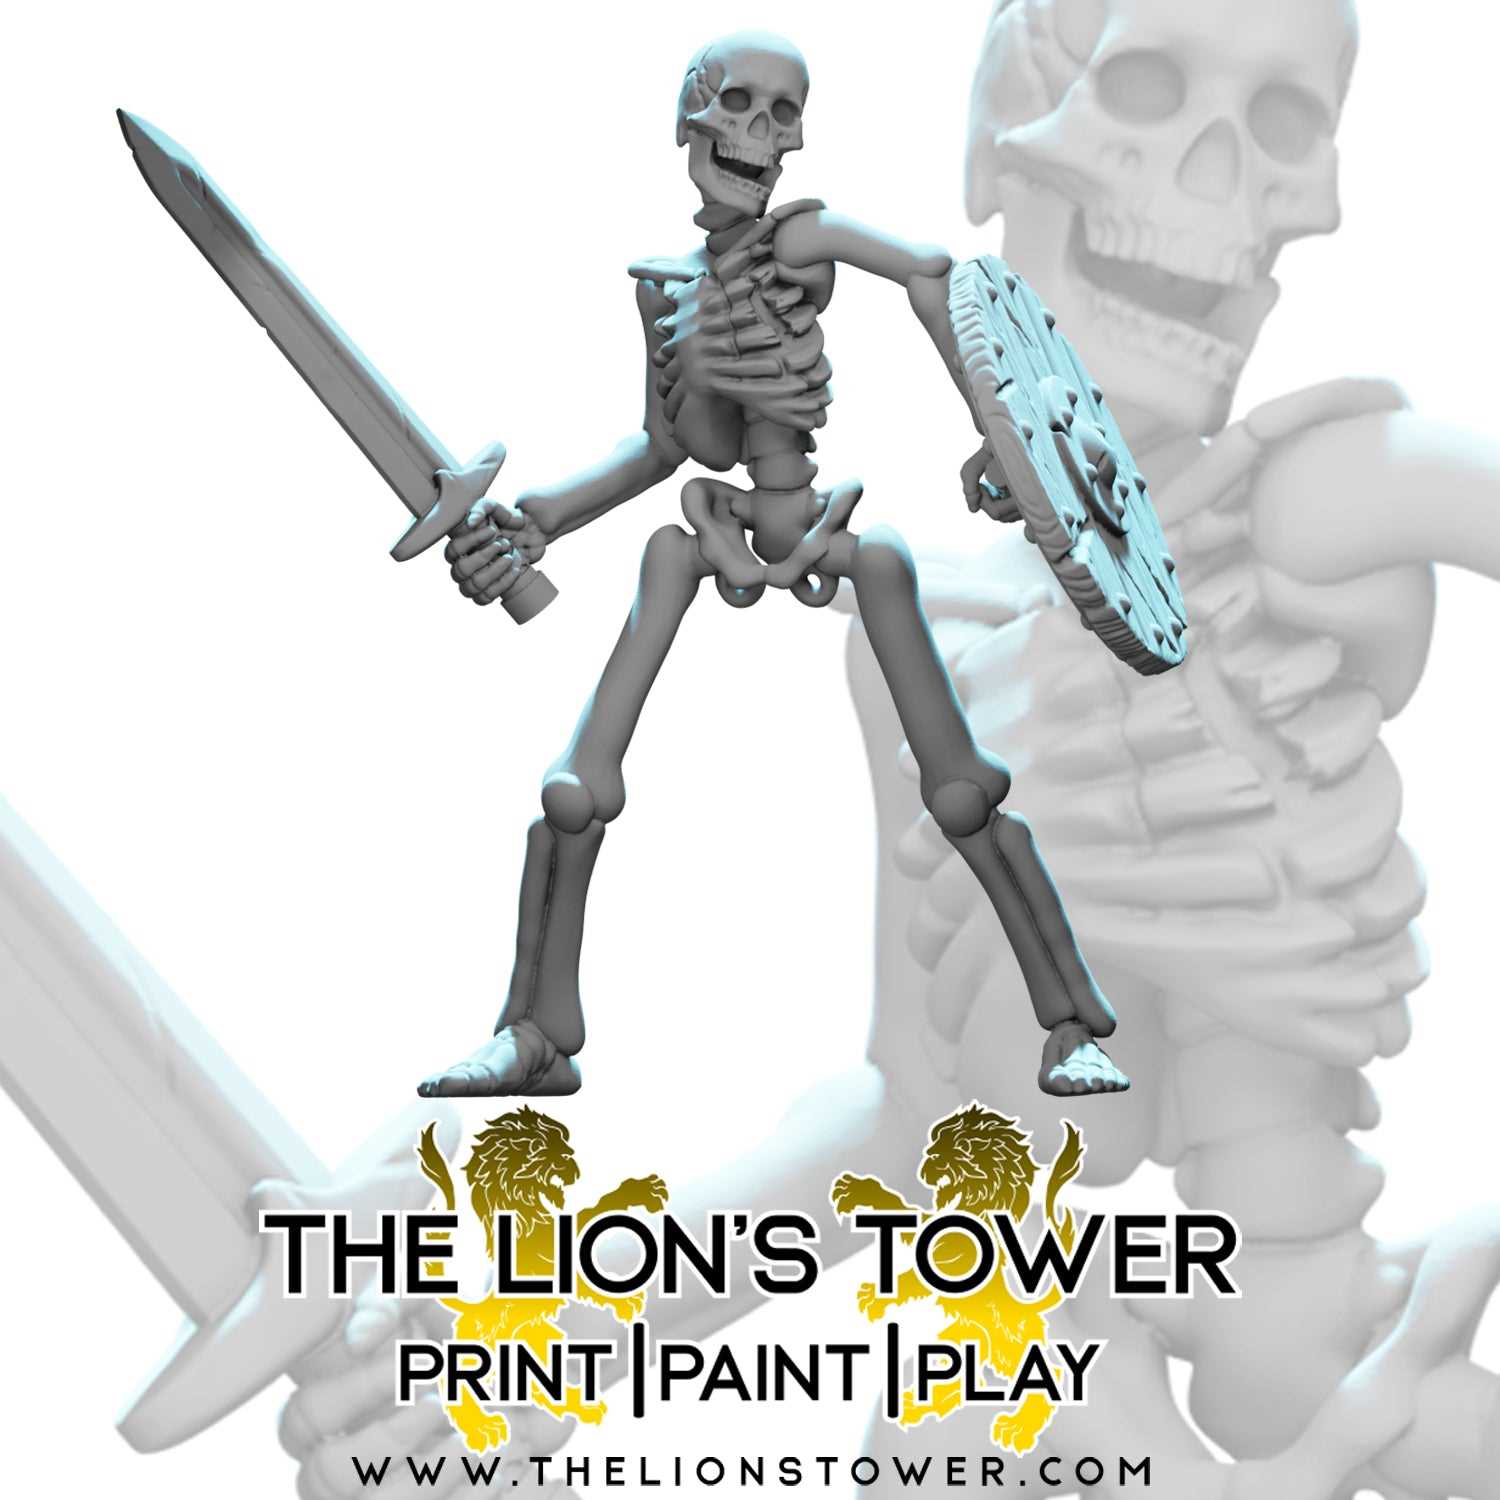 Naked Skeletons with Swords and Shields (Set of 5)